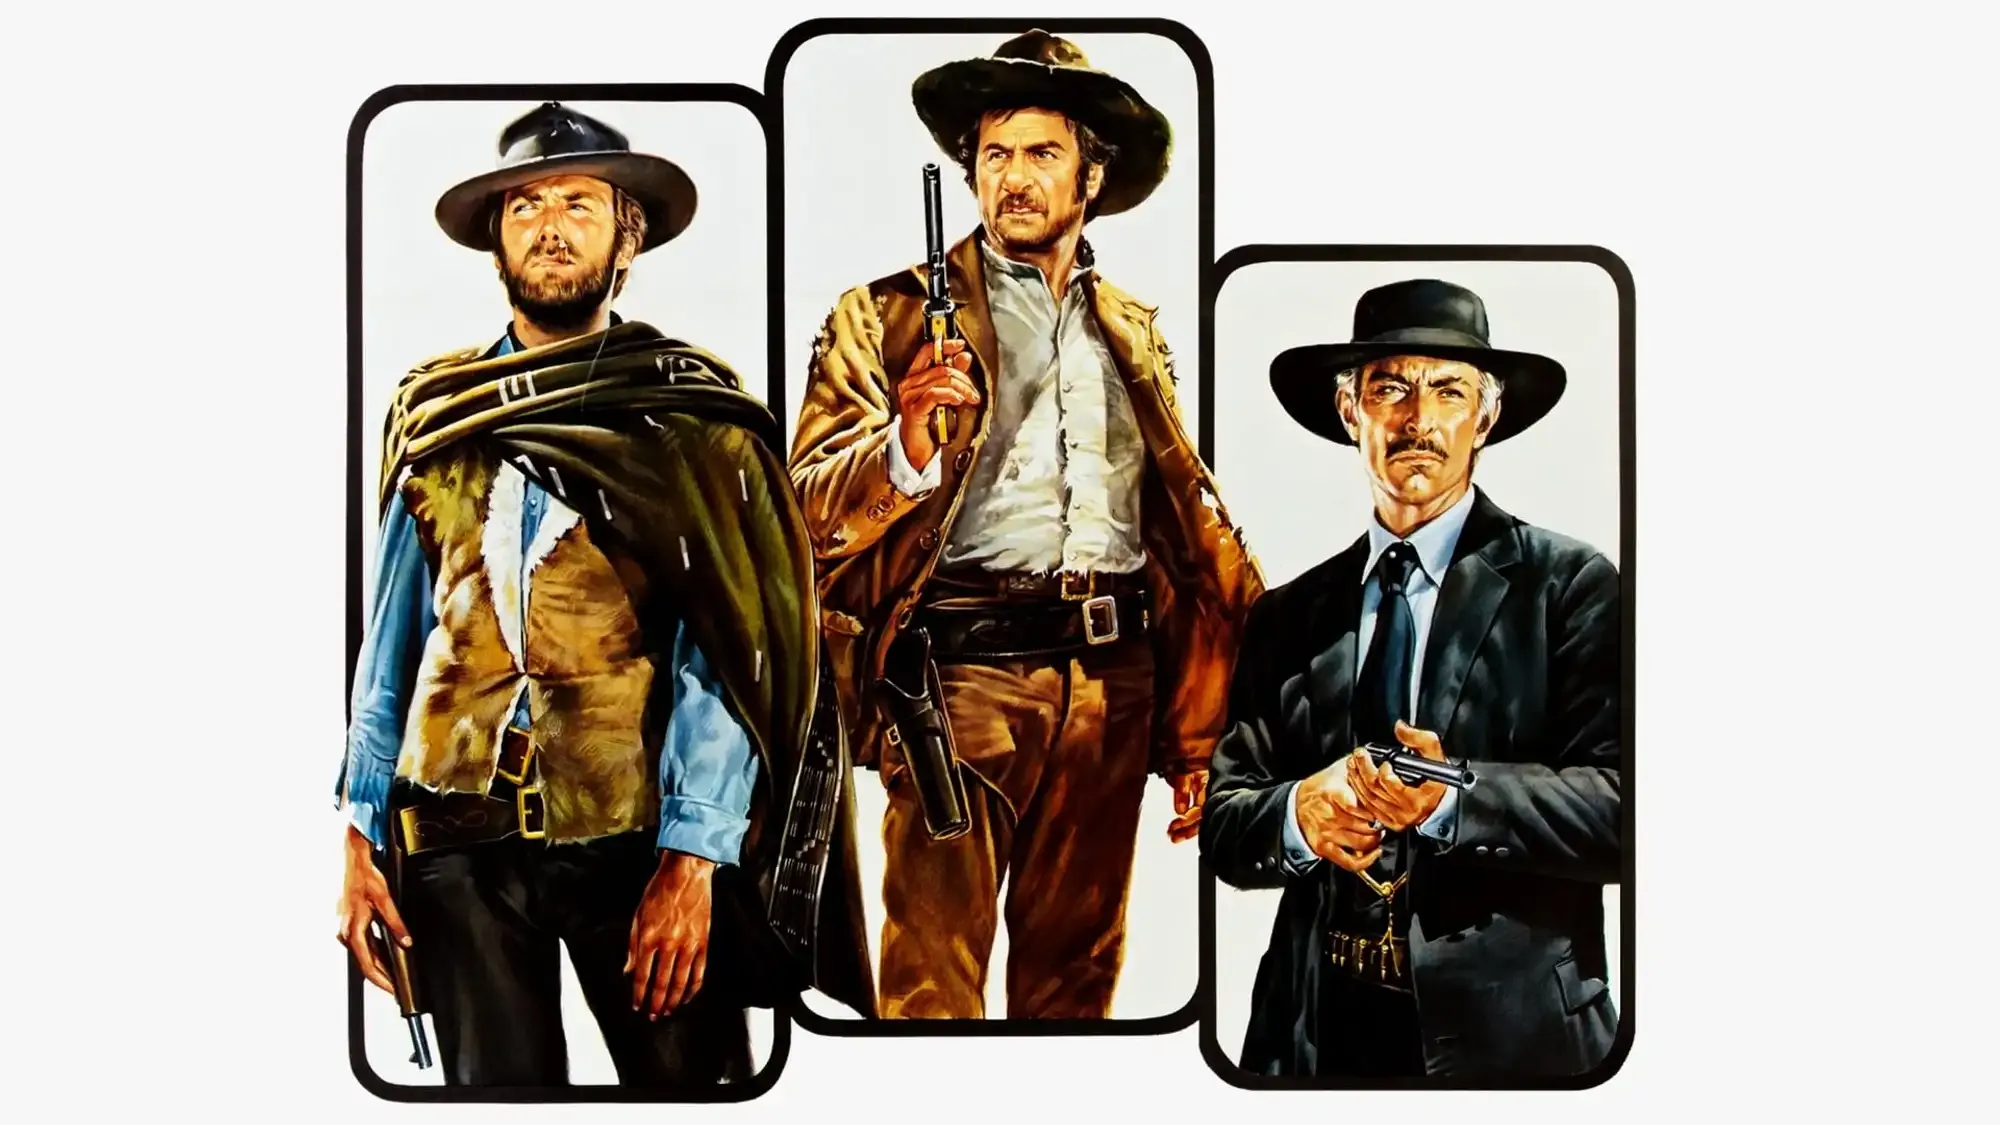 The Good, the Bad and the Ugly movie review